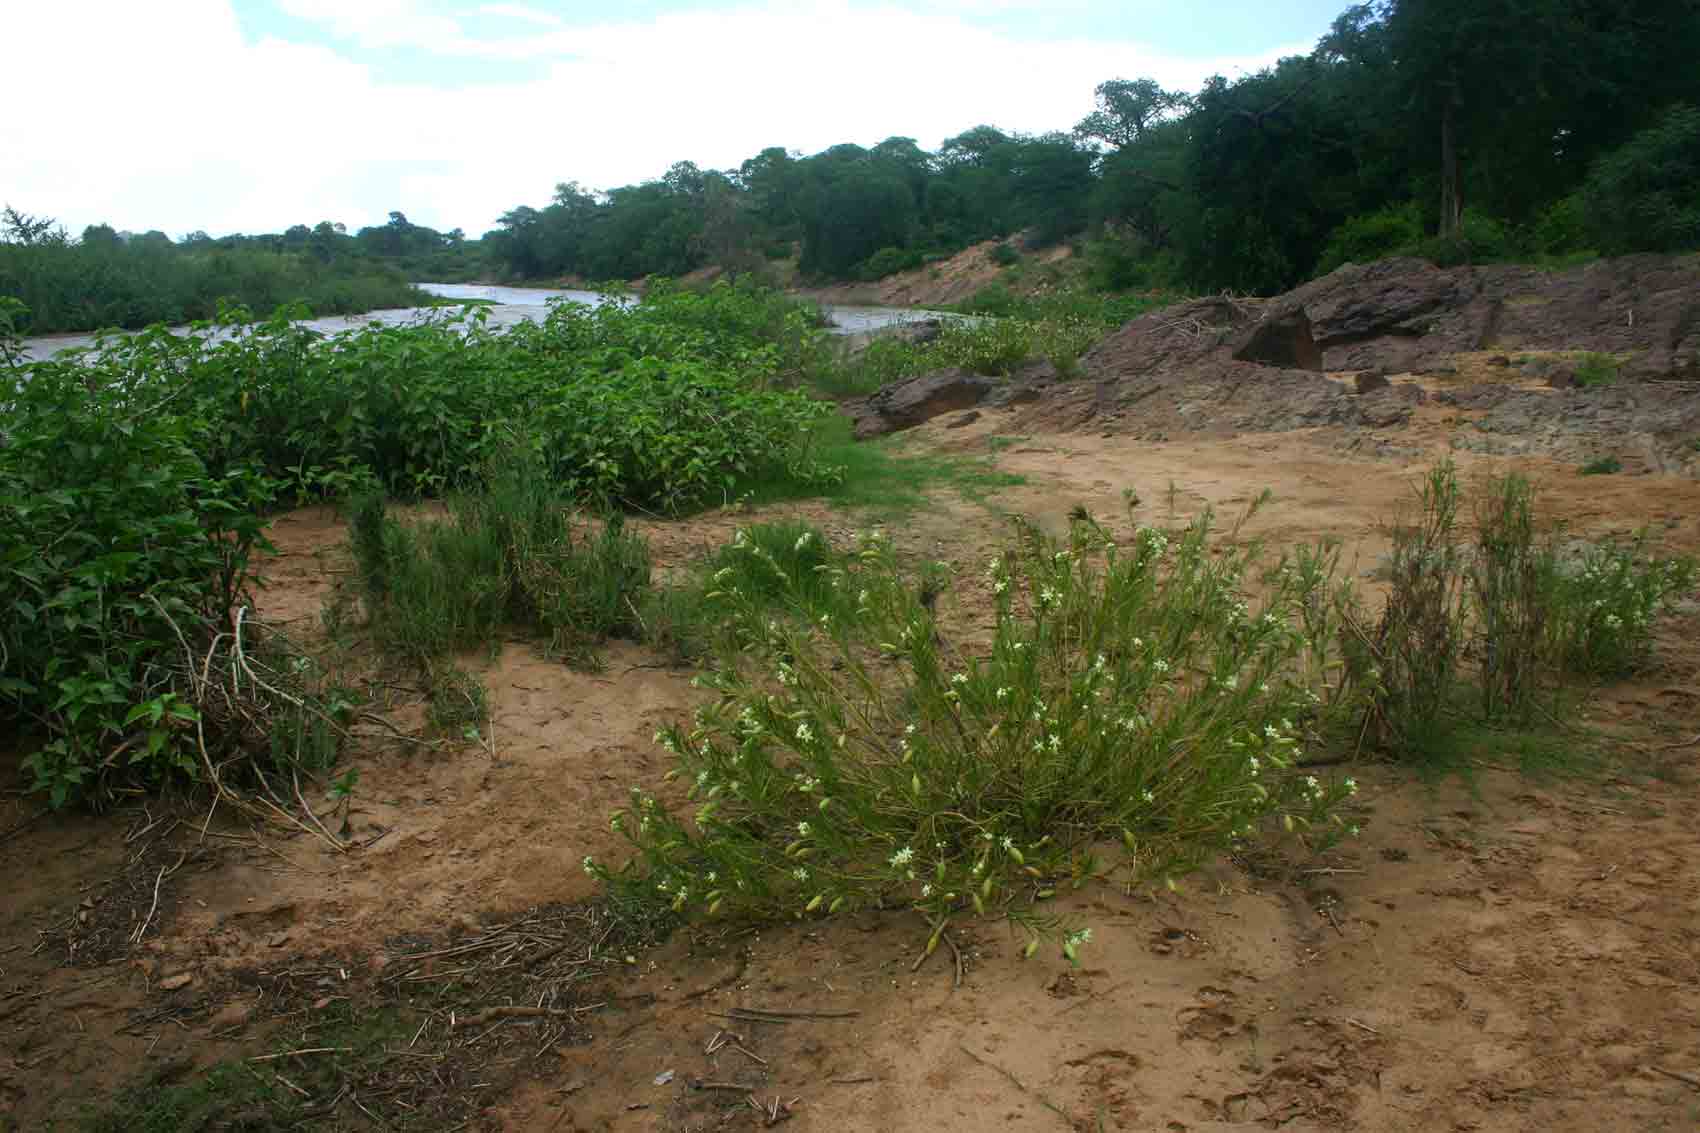 Another view of the Odzi River. Kanahia laniflora in the foreground.